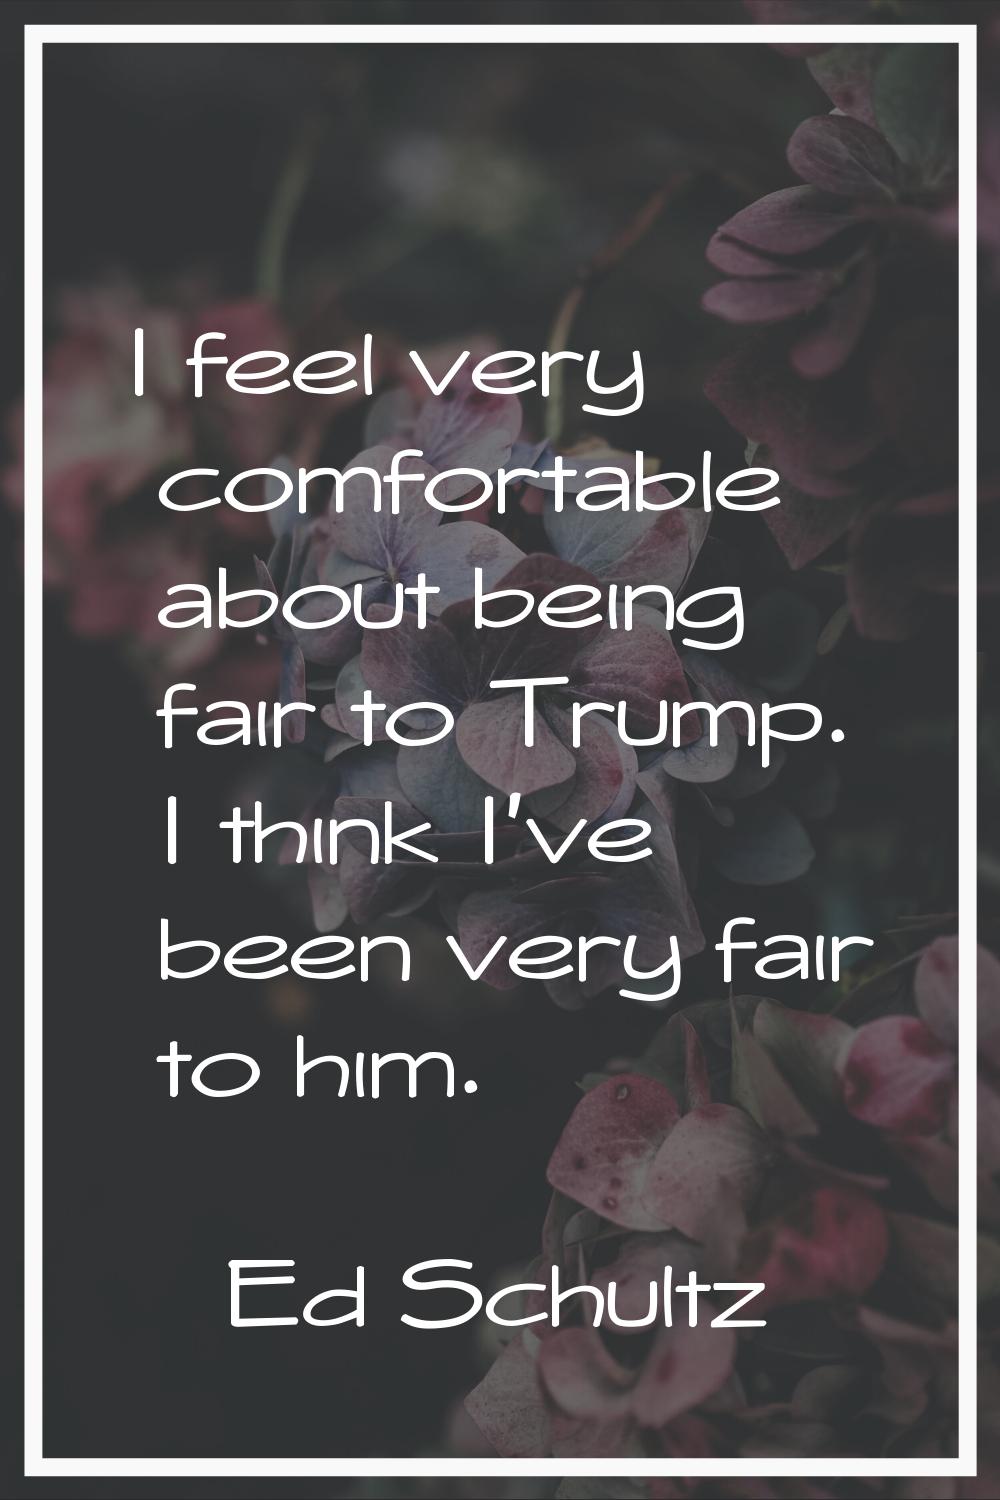 I feel very comfortable about being fair to Trump. I think I've been very fair to him.